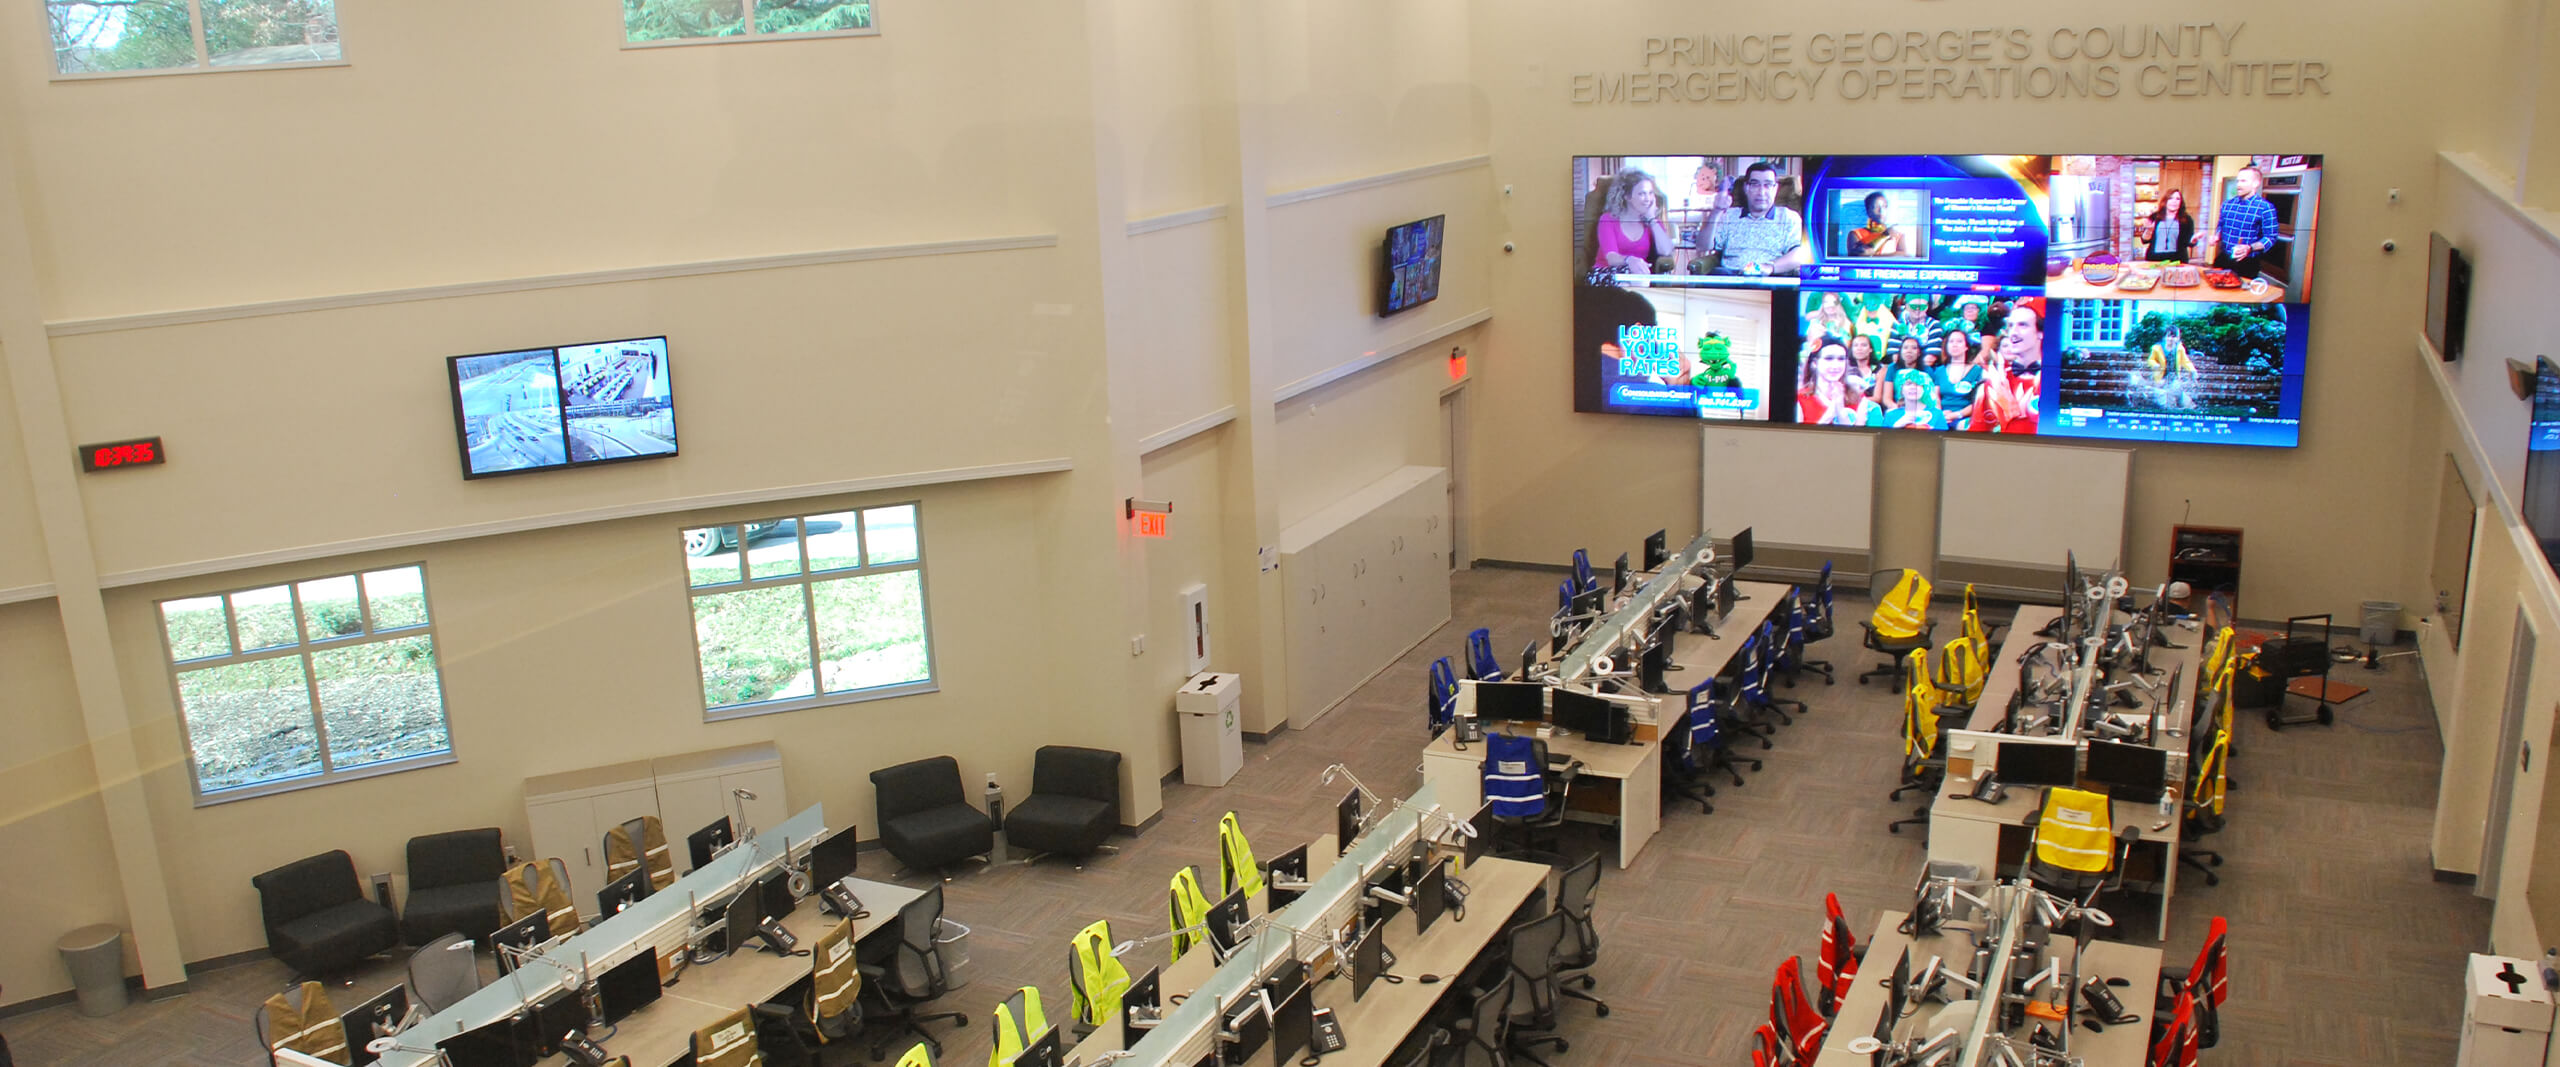 The interior of Prince George's County's emergency command center